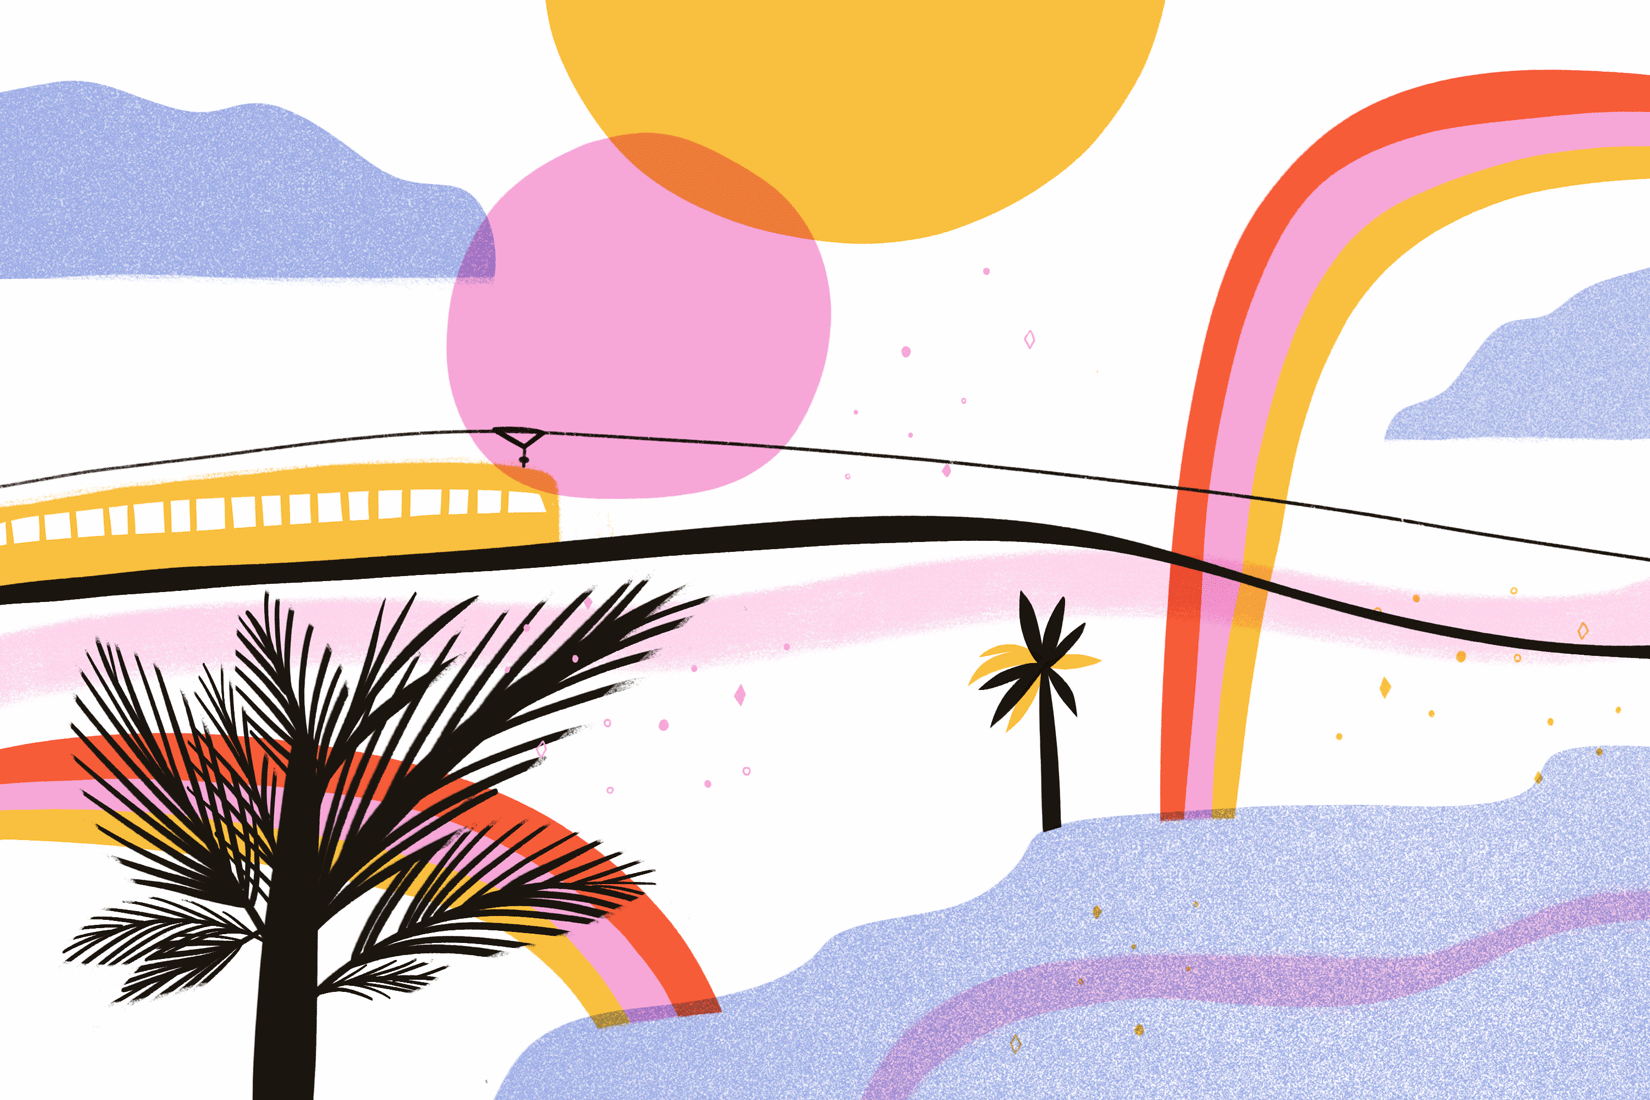 Animated illustration of a light-rail car soaring across a candy-colored skyline with palm trees.